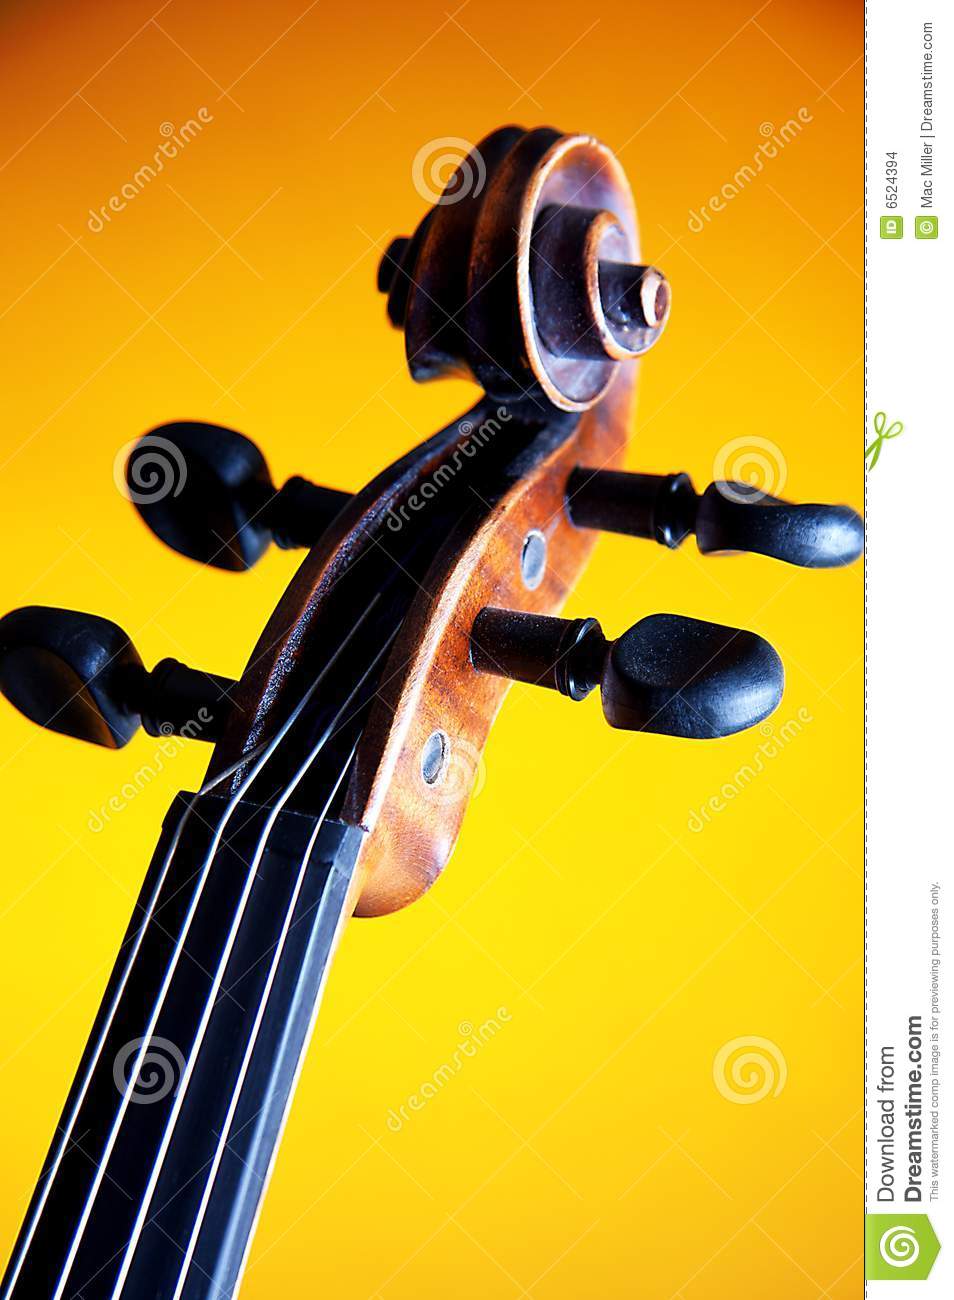 Violin Scroll And F Hole Isolated Against A Yellow Background In The